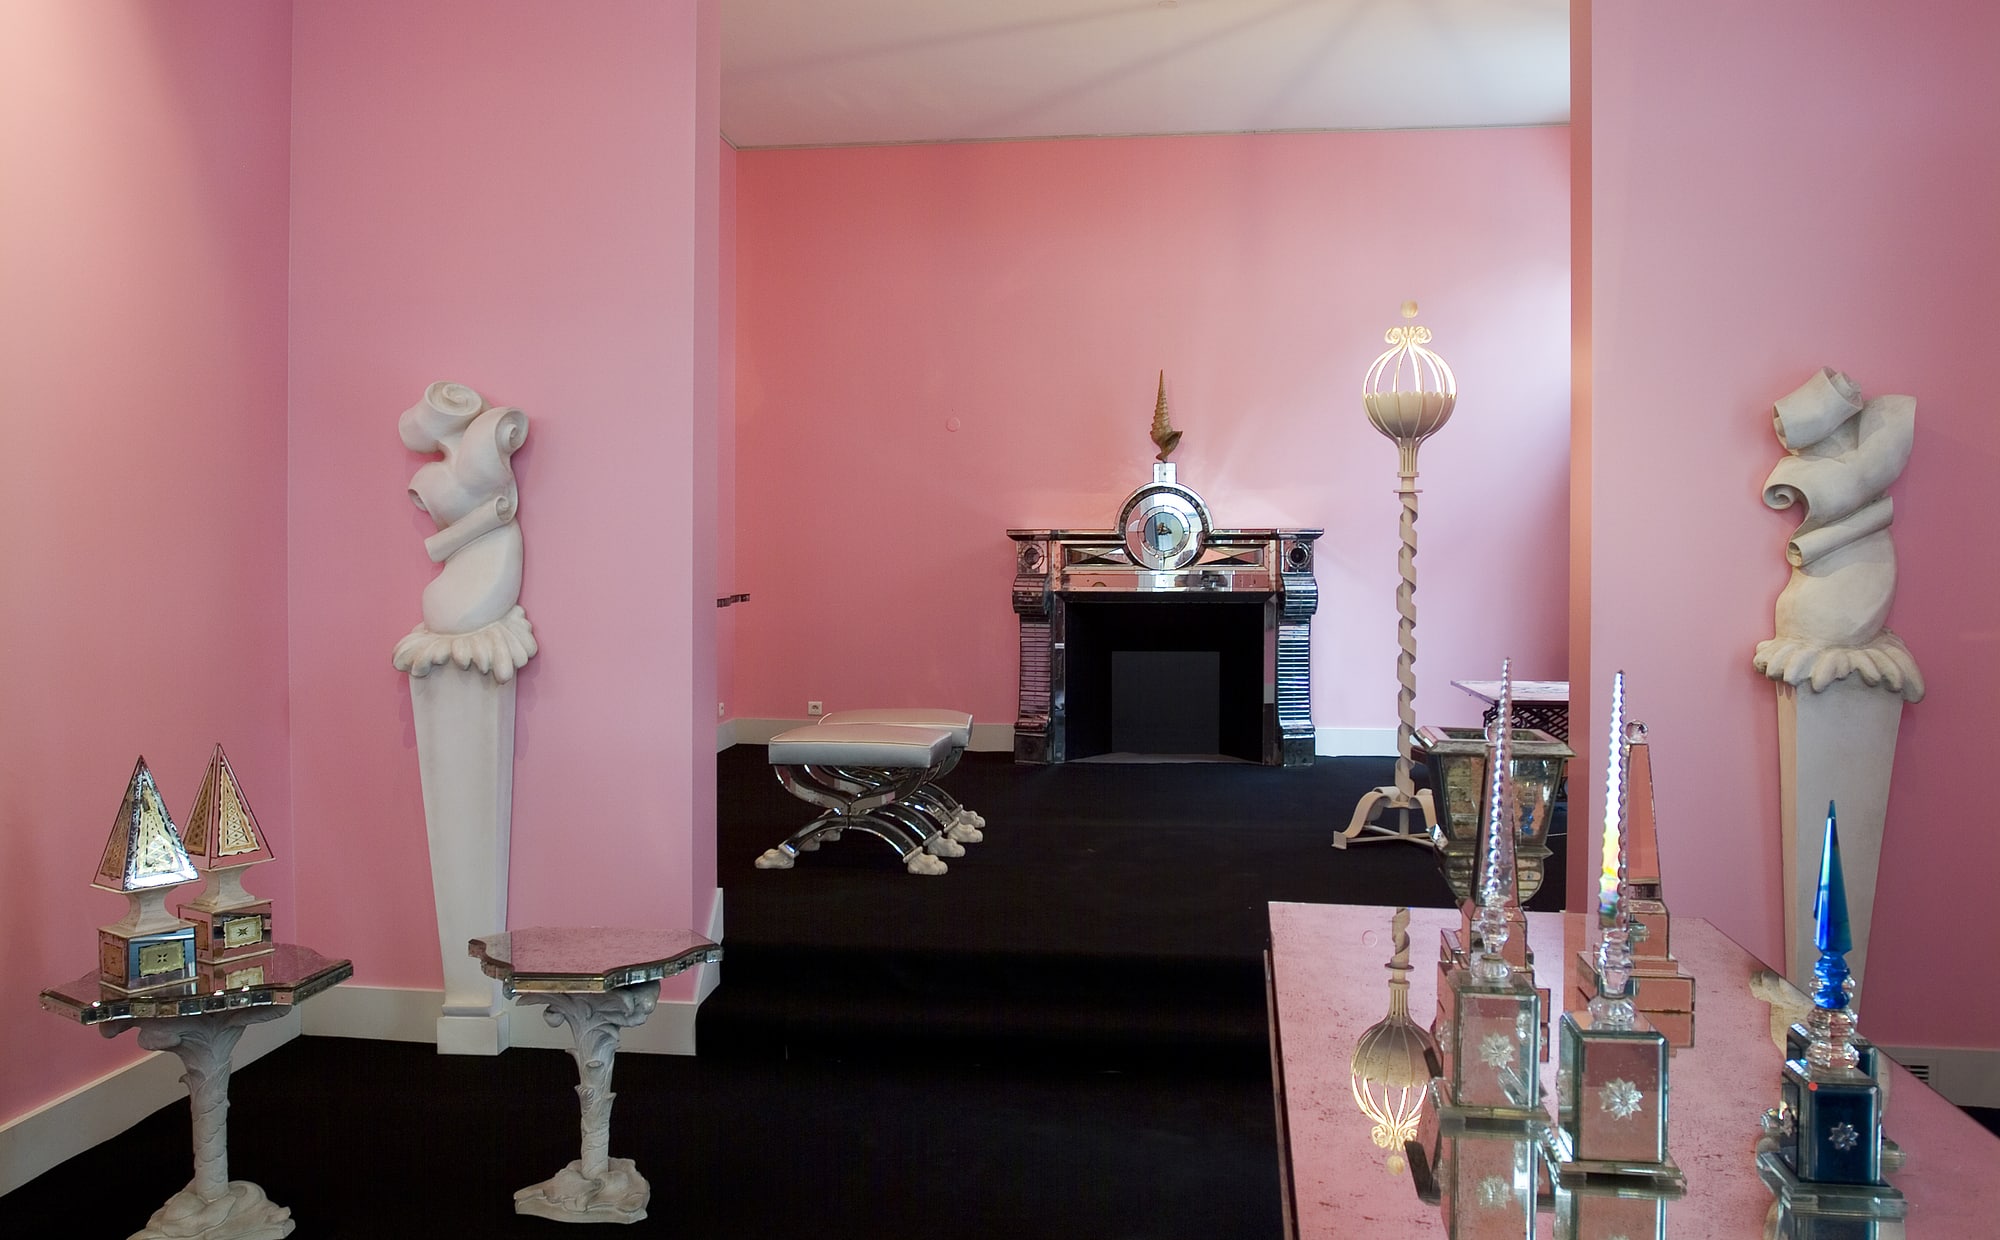 “Un univers baroque”, SERGE ROCHE, Galerie Chastel-Maréchal, from september 13th to october 14th, 2006